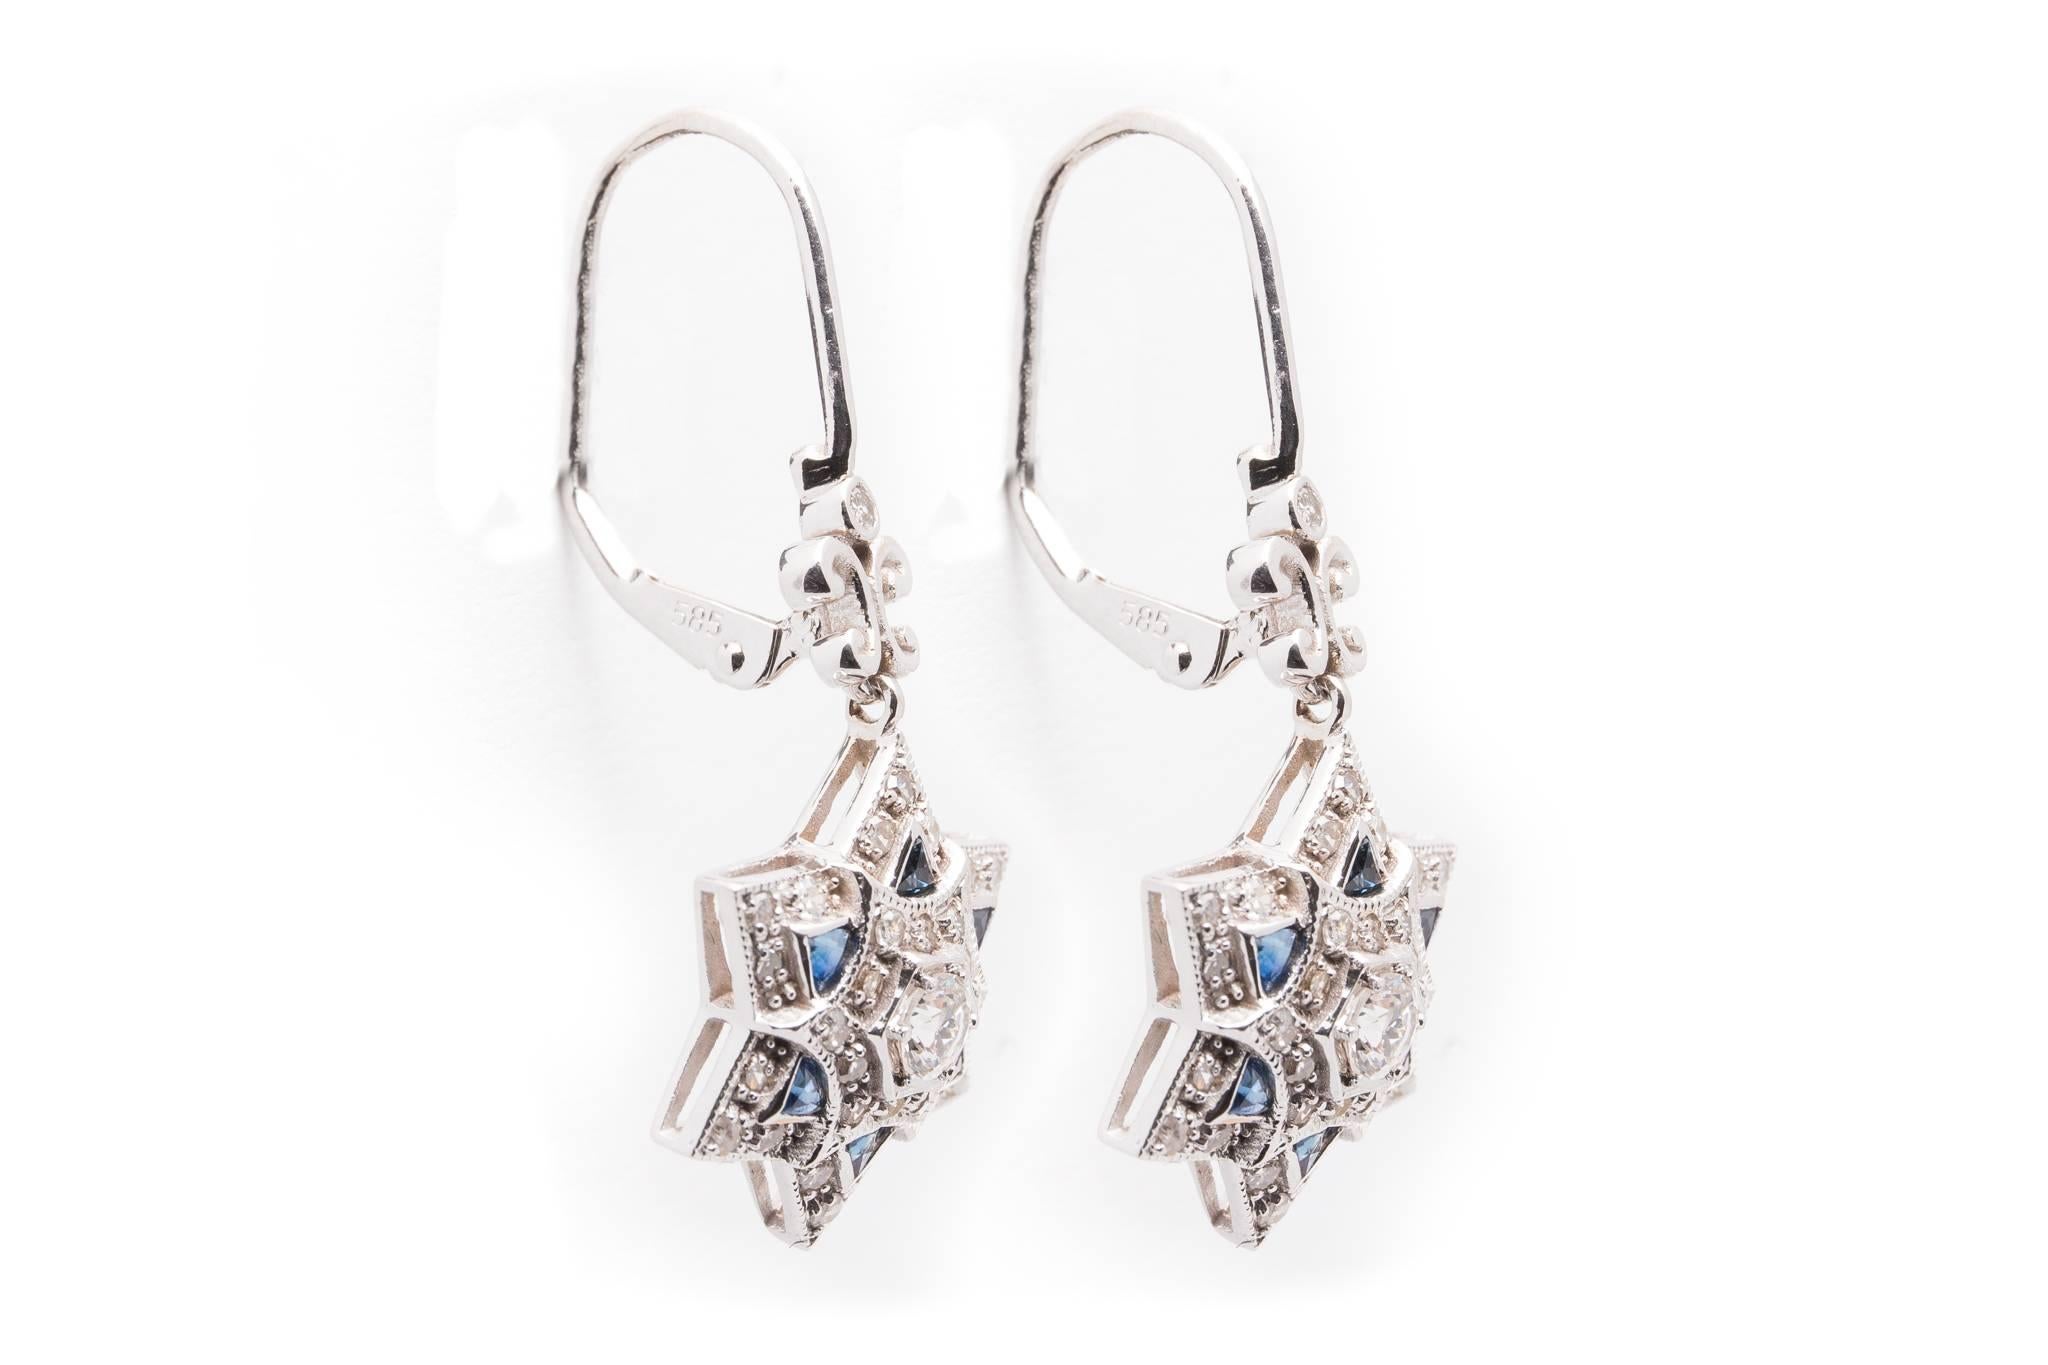 Beacon Hill Jewelers Presents:

A beautiful pair of Star of David shaped earrings in 14 karat white gold. Set with a dozen rich vibrant blue French cut sapphires and pave set with diamonds these are truly stunning and unique earrings.

Centering